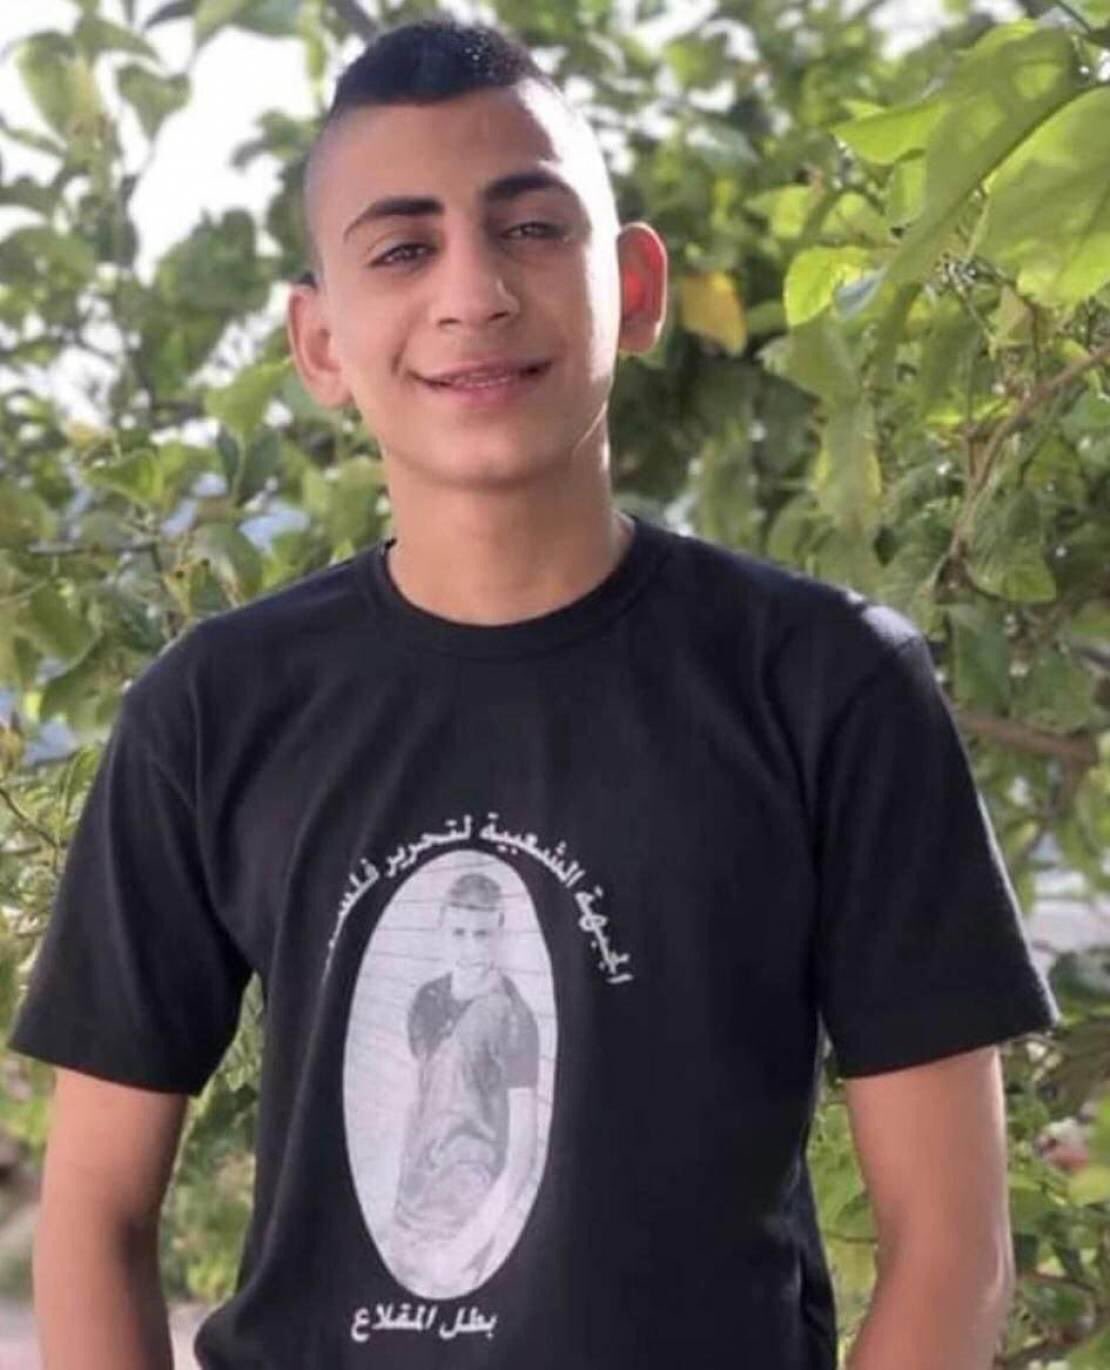 A Palestinian child was reported killed from serious wounds he sustained on Monday morning, January 16, by Israeli gunfire in the Al-Duhaisha refugee camp in occupied Bethlehem.